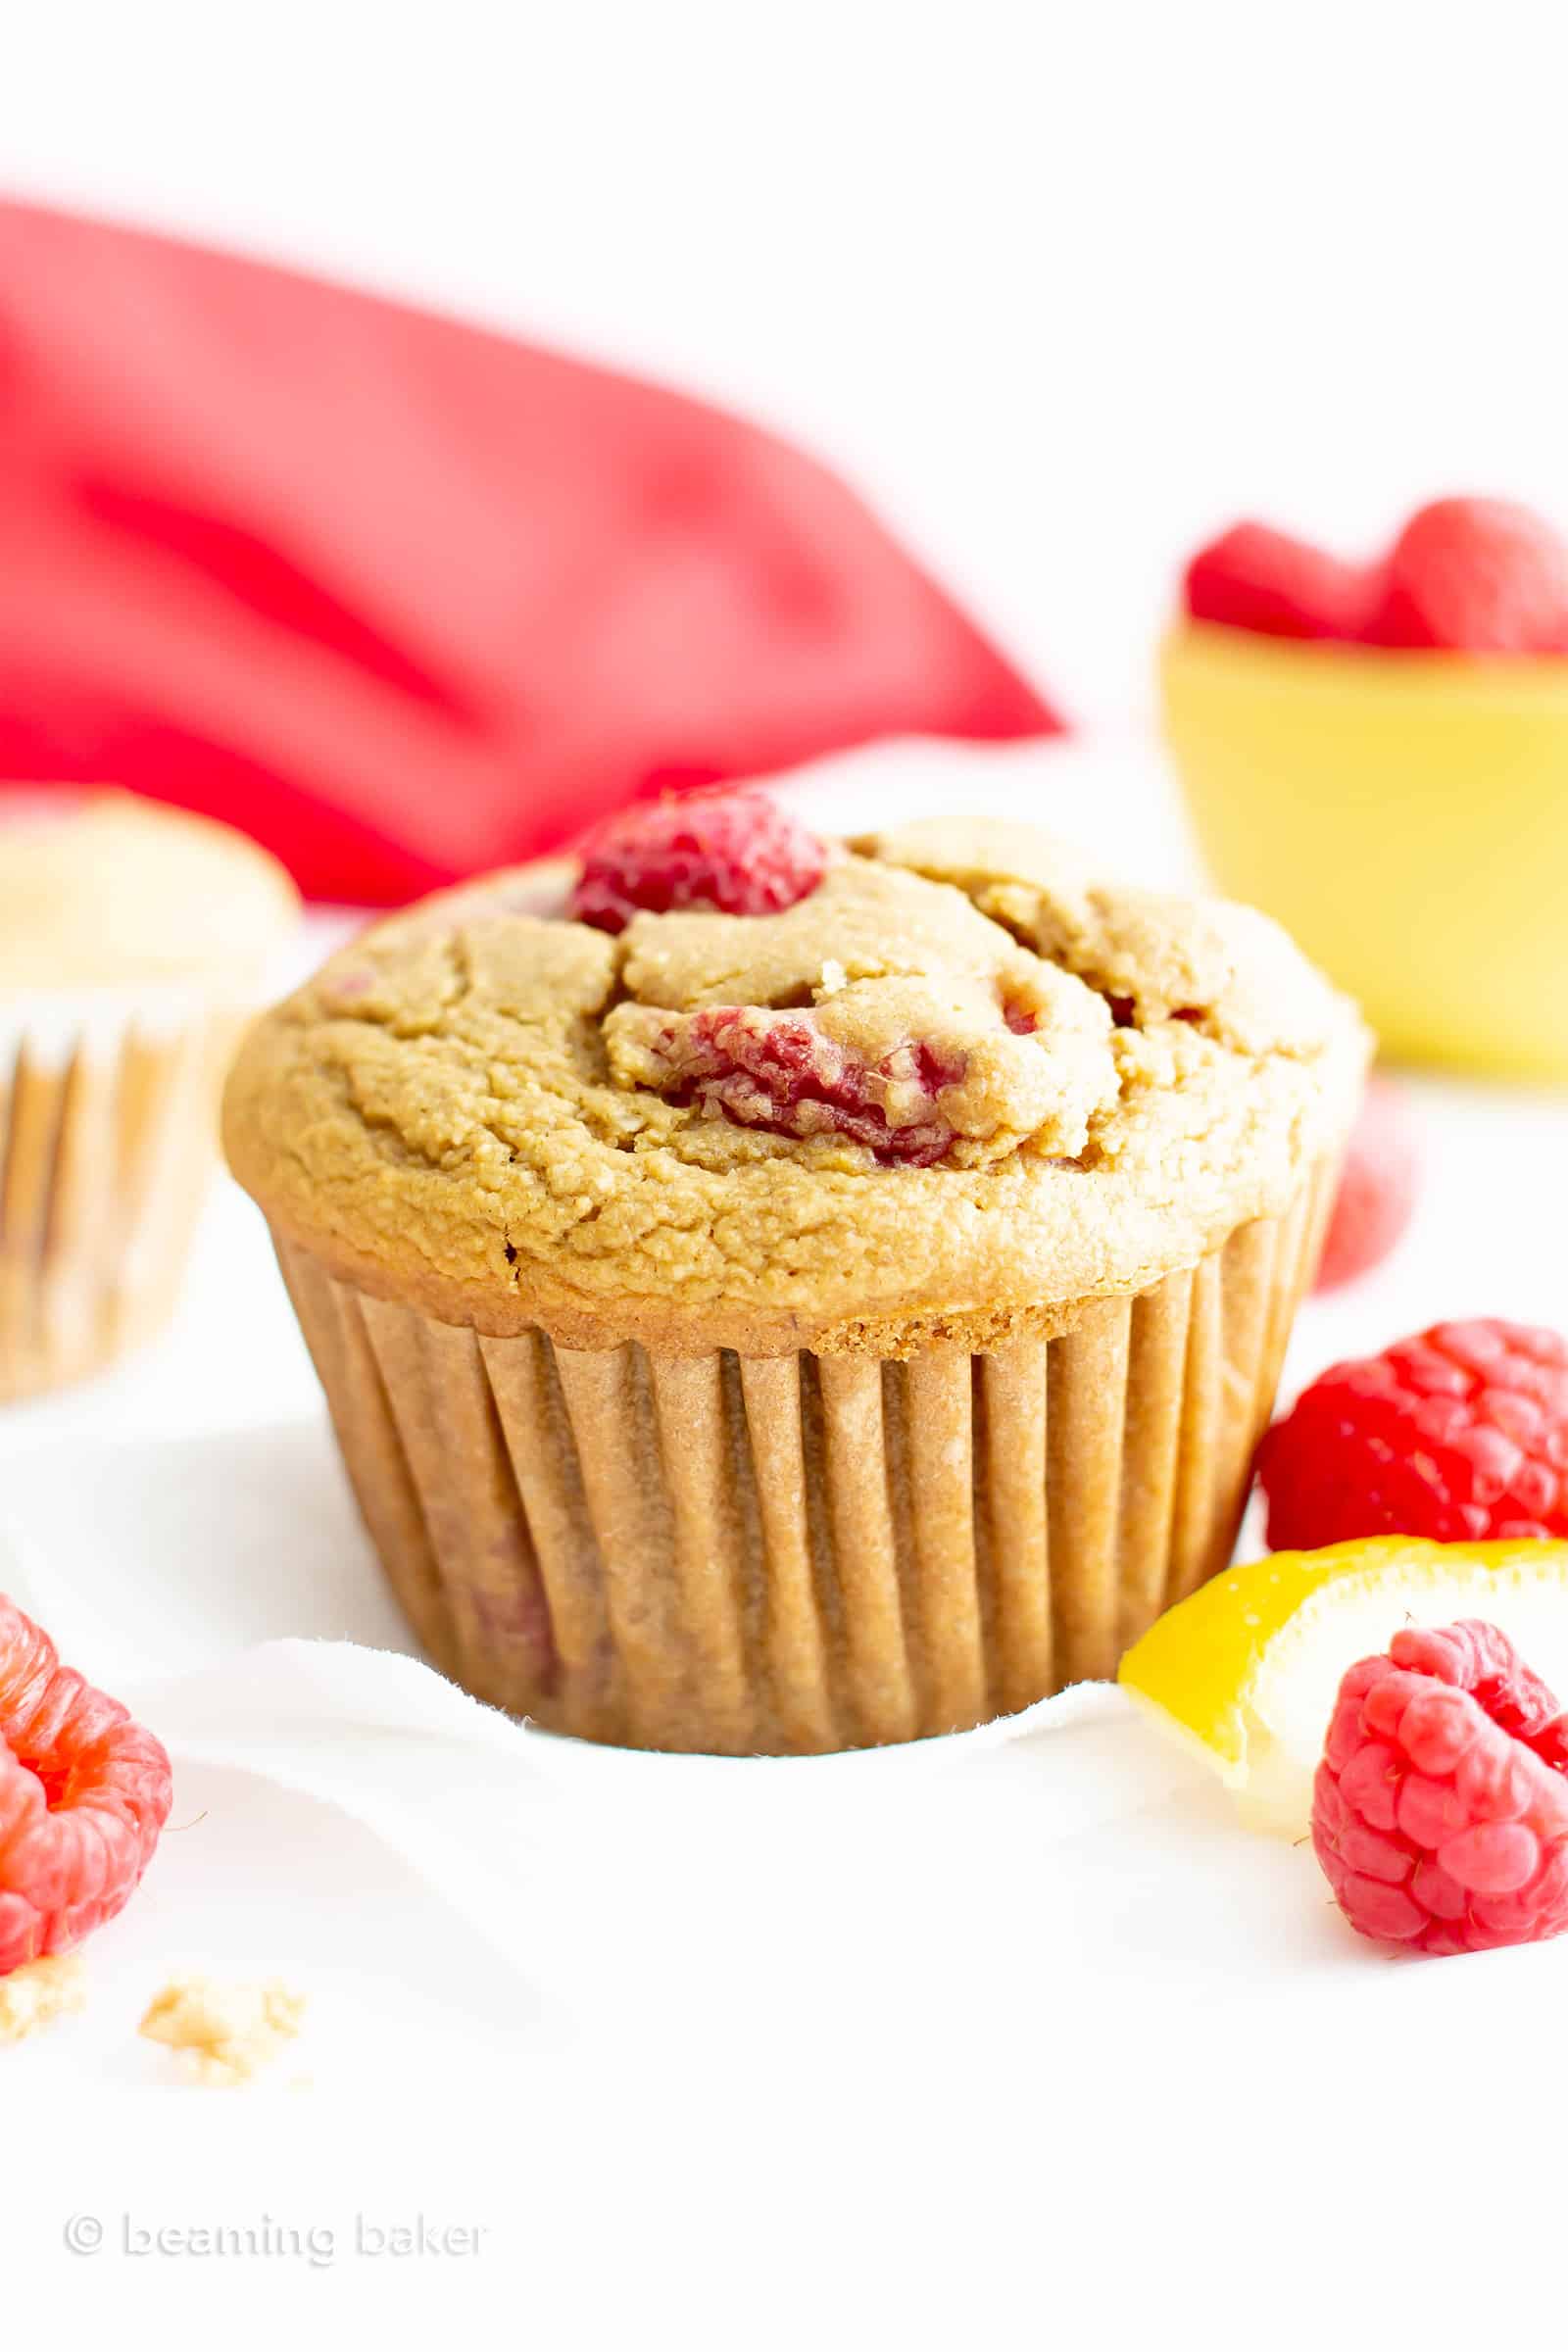 Vegan gluten free lemon raspberry muffin with raspberries on the side and yellow bowl of raspberries in the background